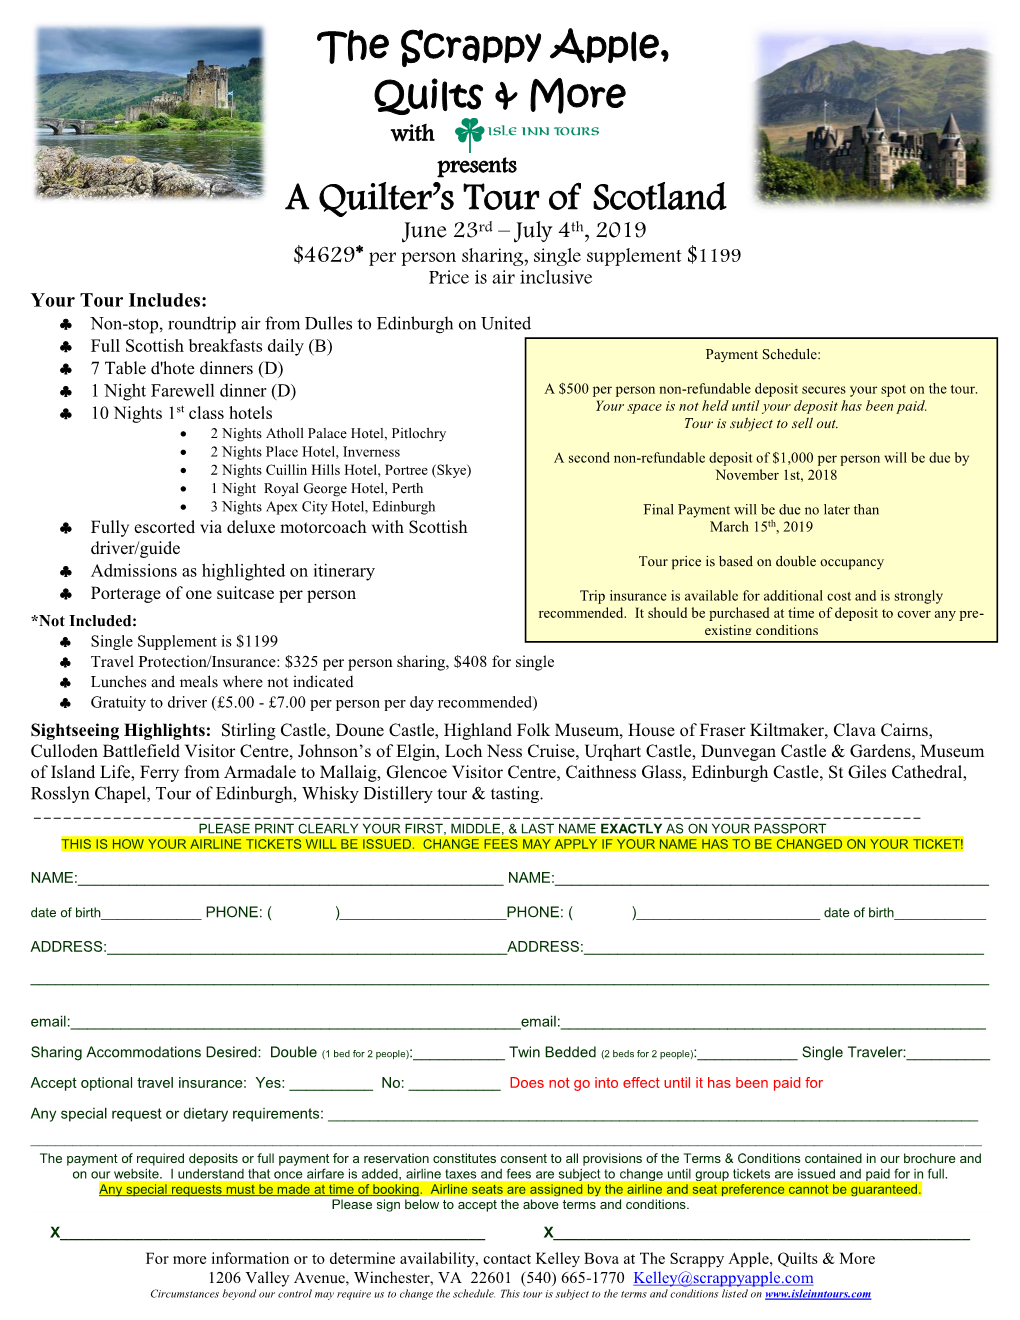 A Quilter's Tour of Scotland